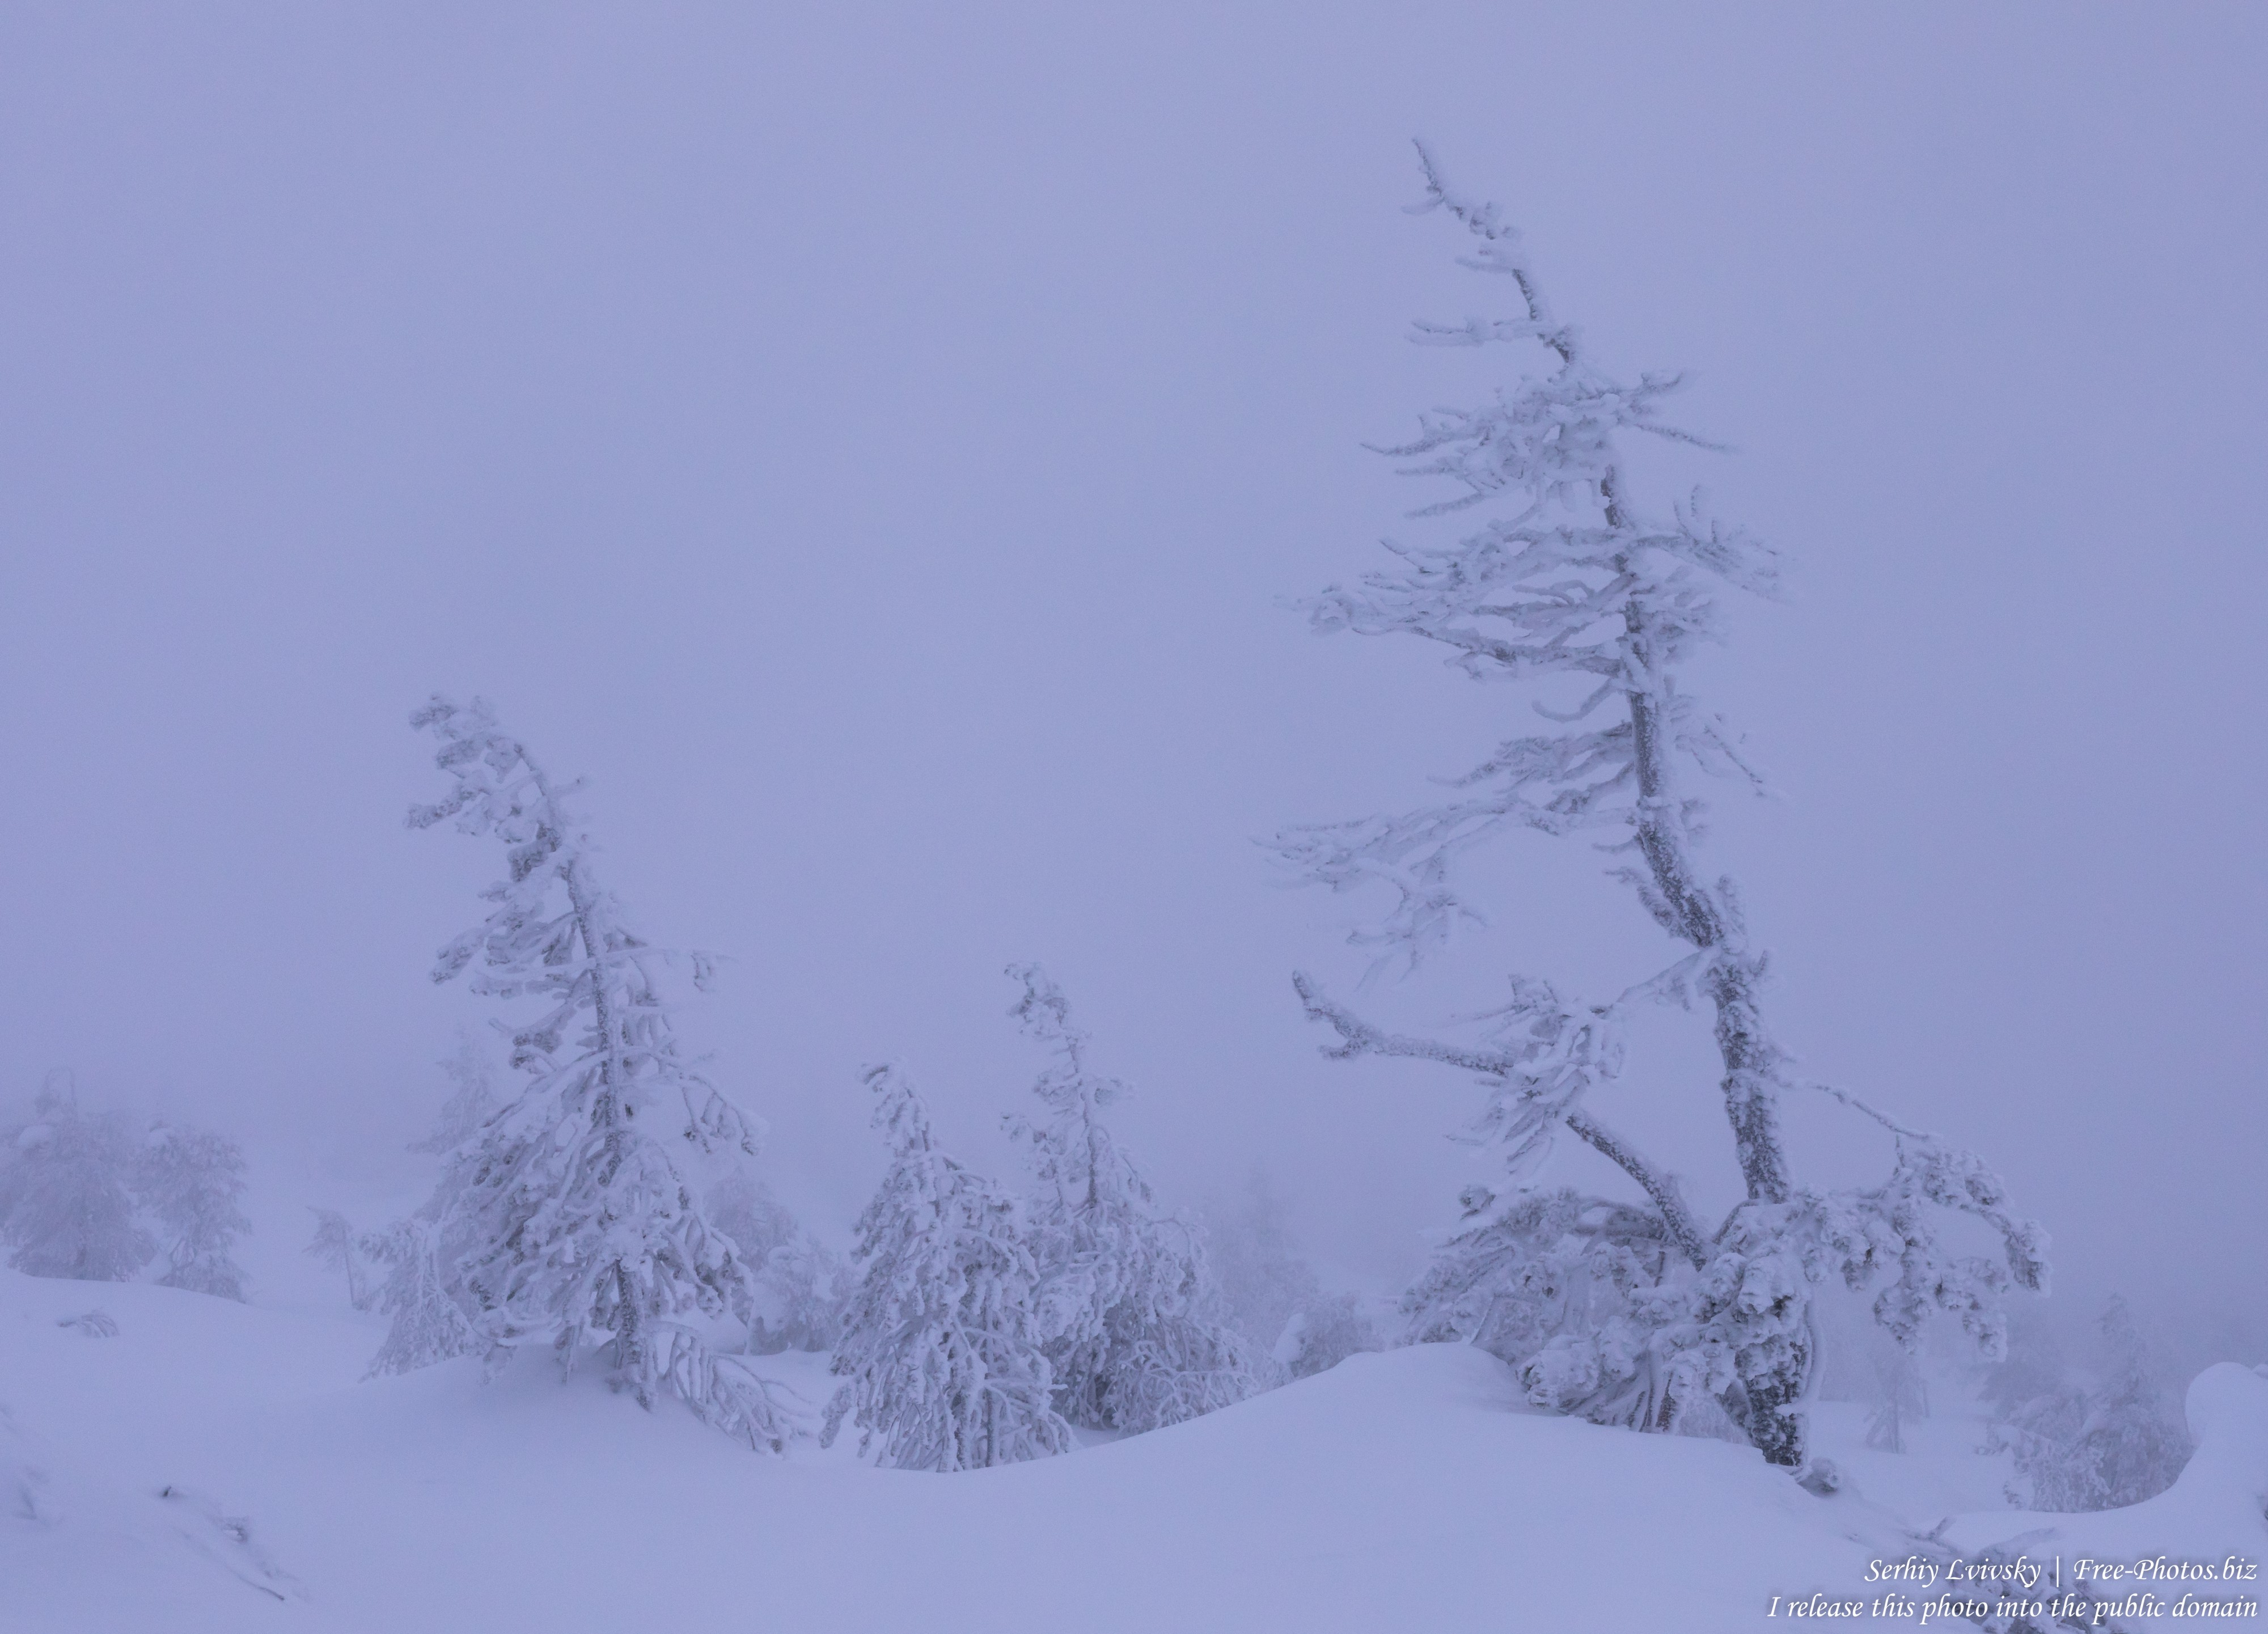 Sallatunturi, Finland, photographed in January 2020 by Serhiy Lvivsky, picture 8